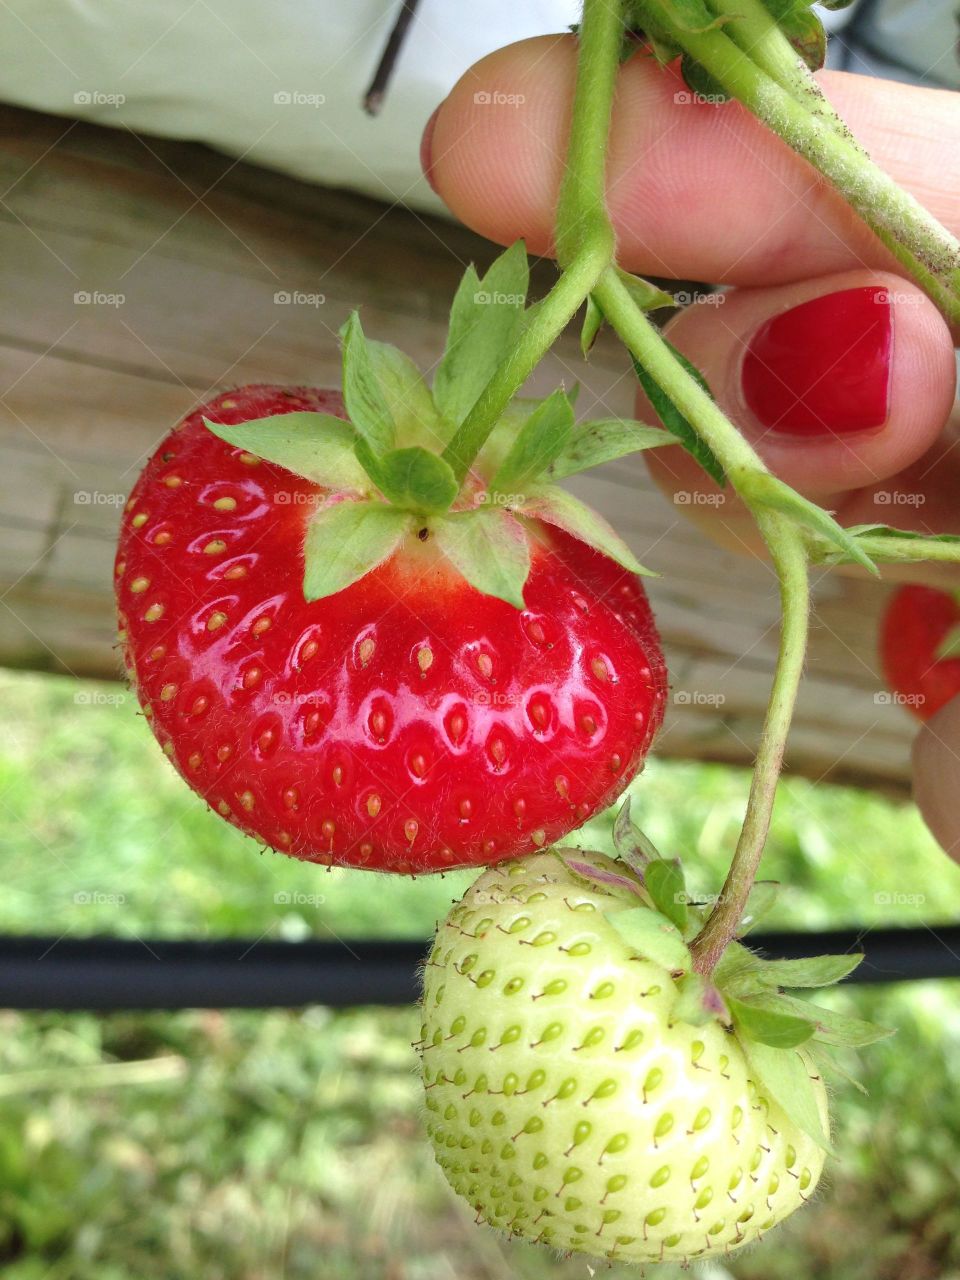 One red strawberry, one green strawberry